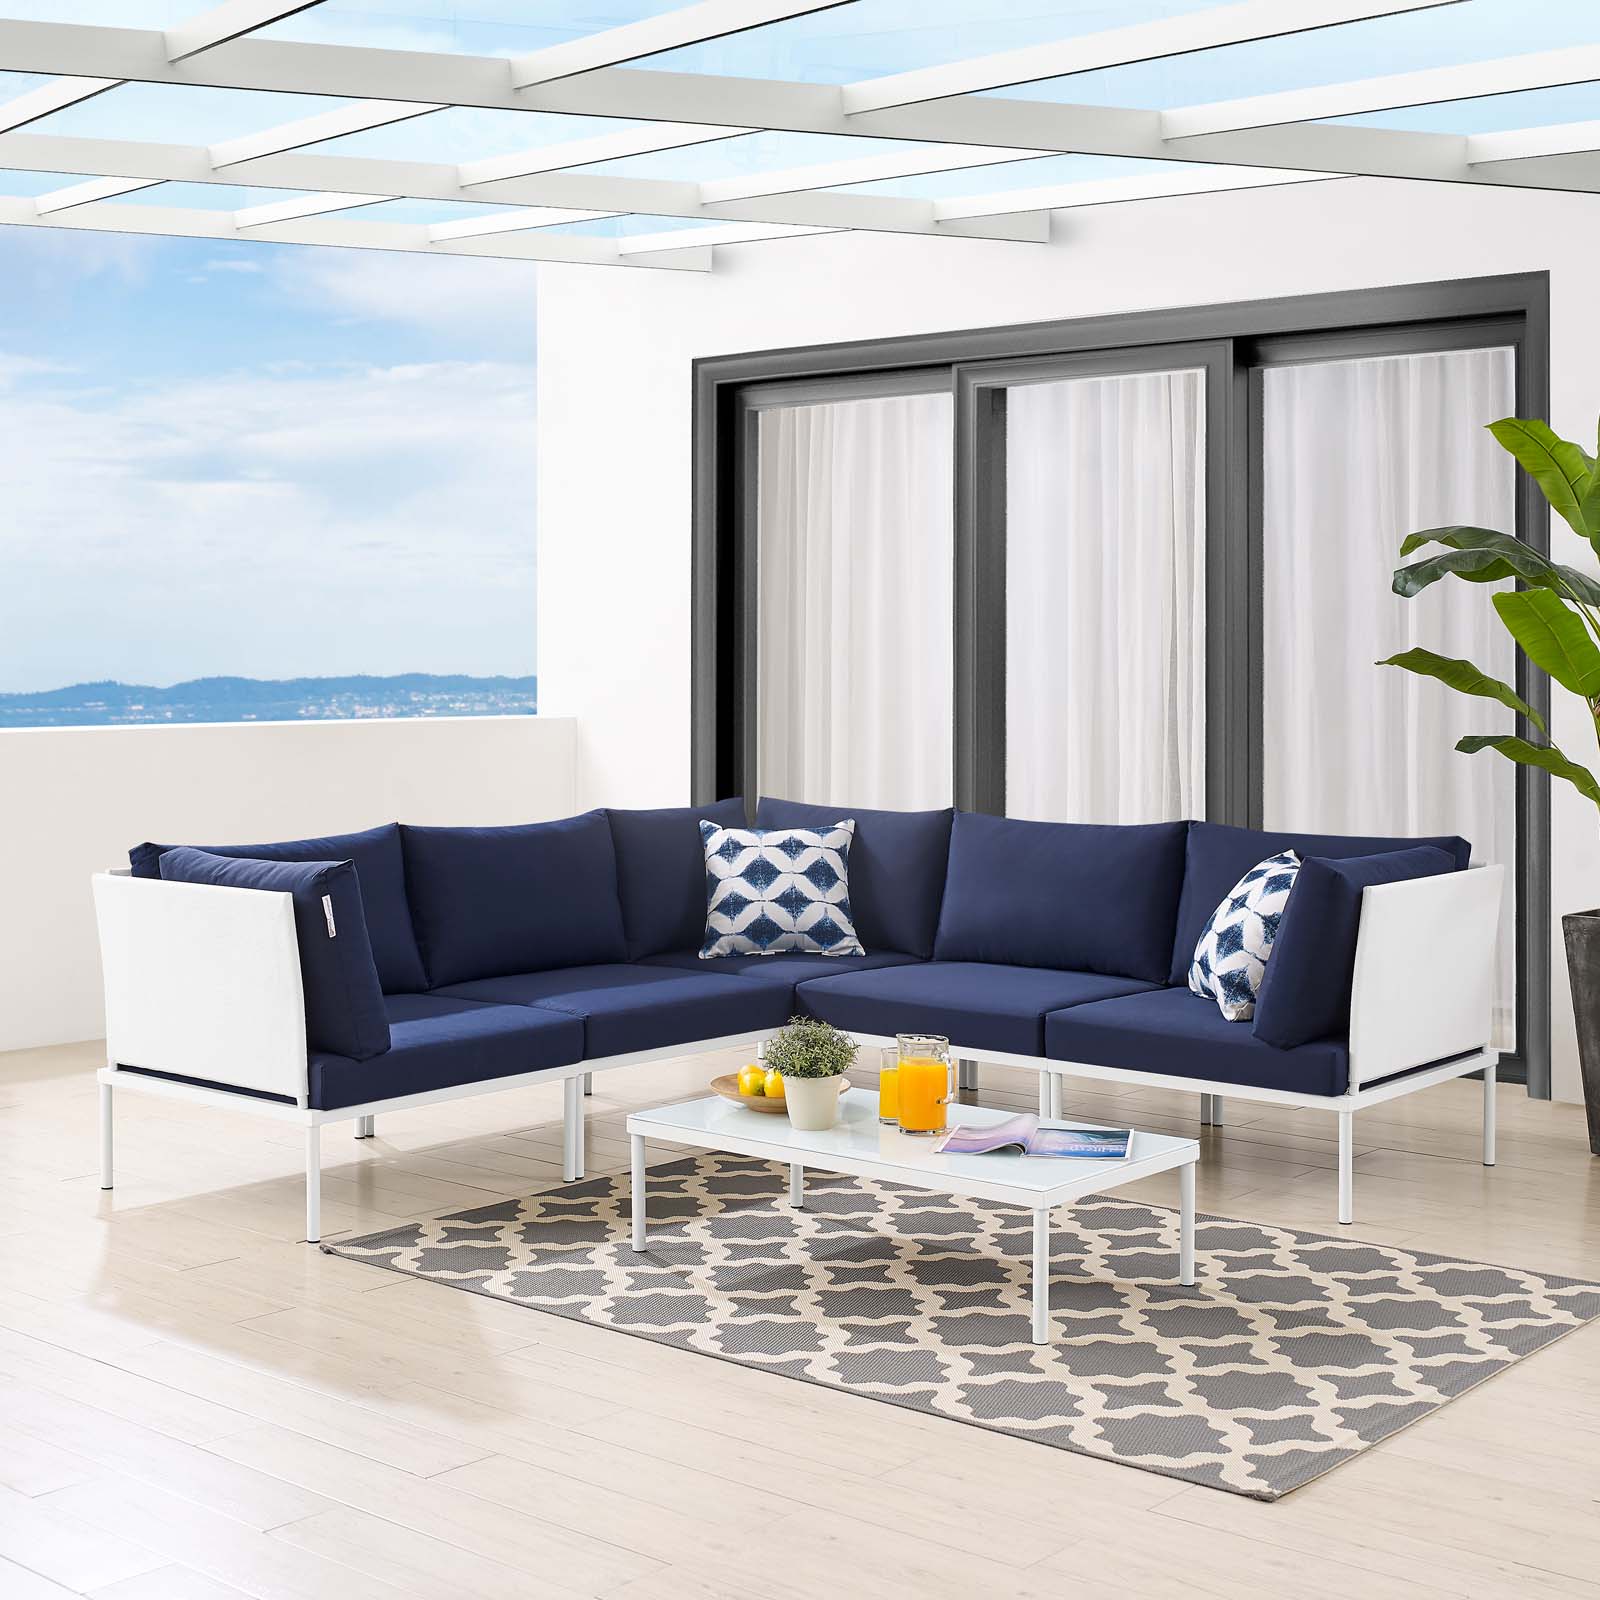 Lounge Sectional Sofa Chair Table Set, Sunbrella, Aluminum, Metal, Steel, White Blue Navy, Modern Contemporary Urban Design, Outdoor Patio Balcony Cafe Bistro Garden Furniture Hotel Hospitality - image 2 of 10